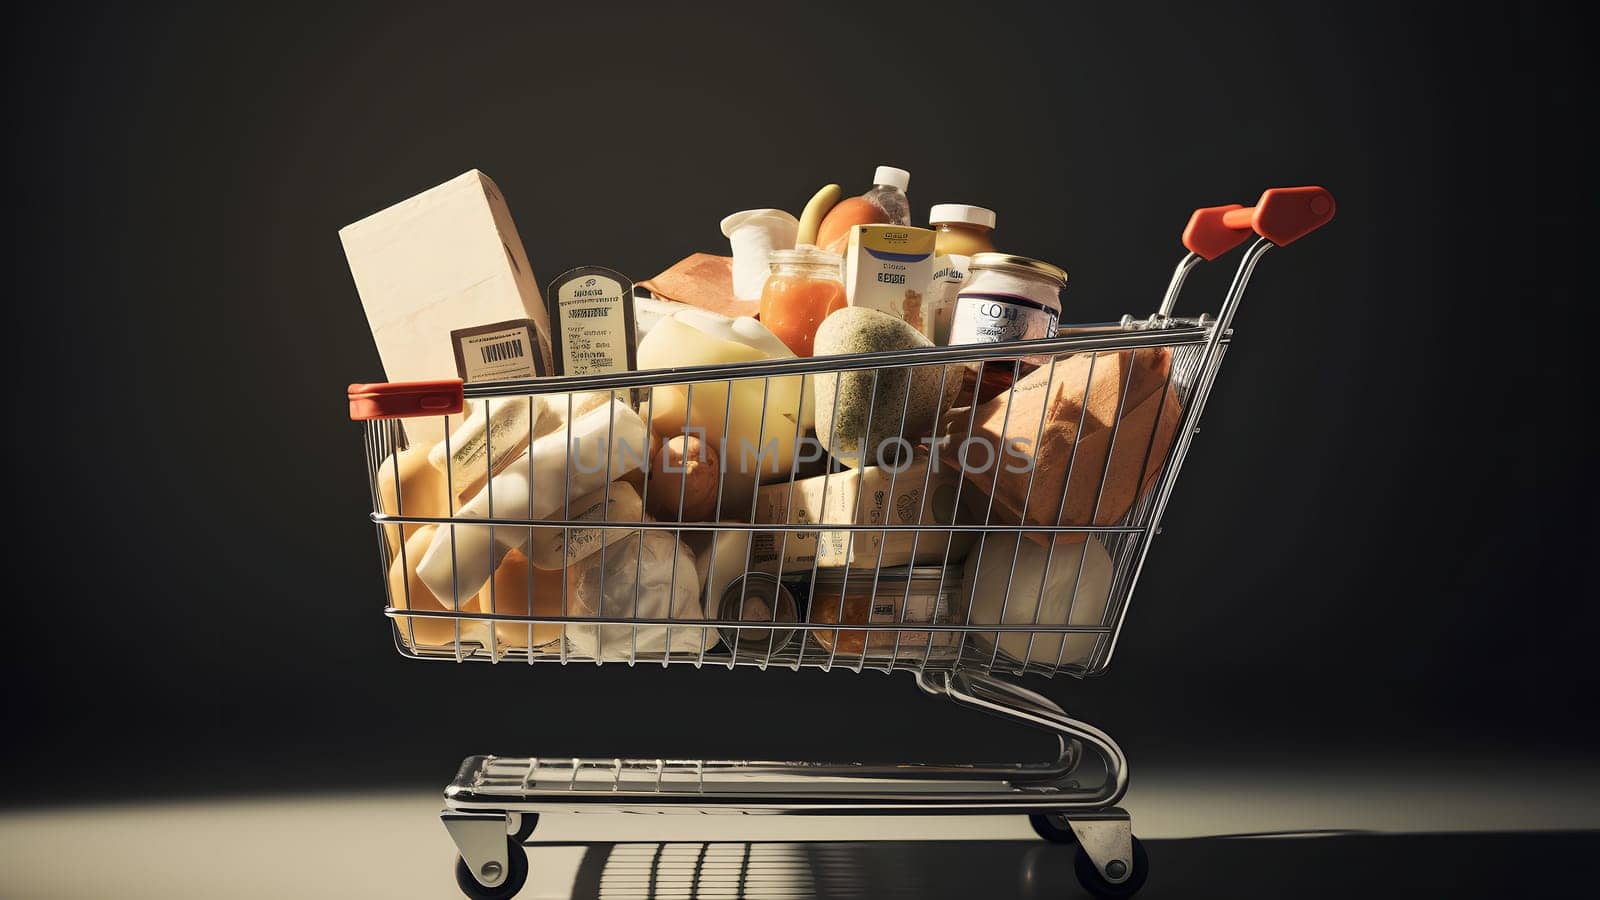 supermarket cart filled with products on black background, neural network generated image by z1b